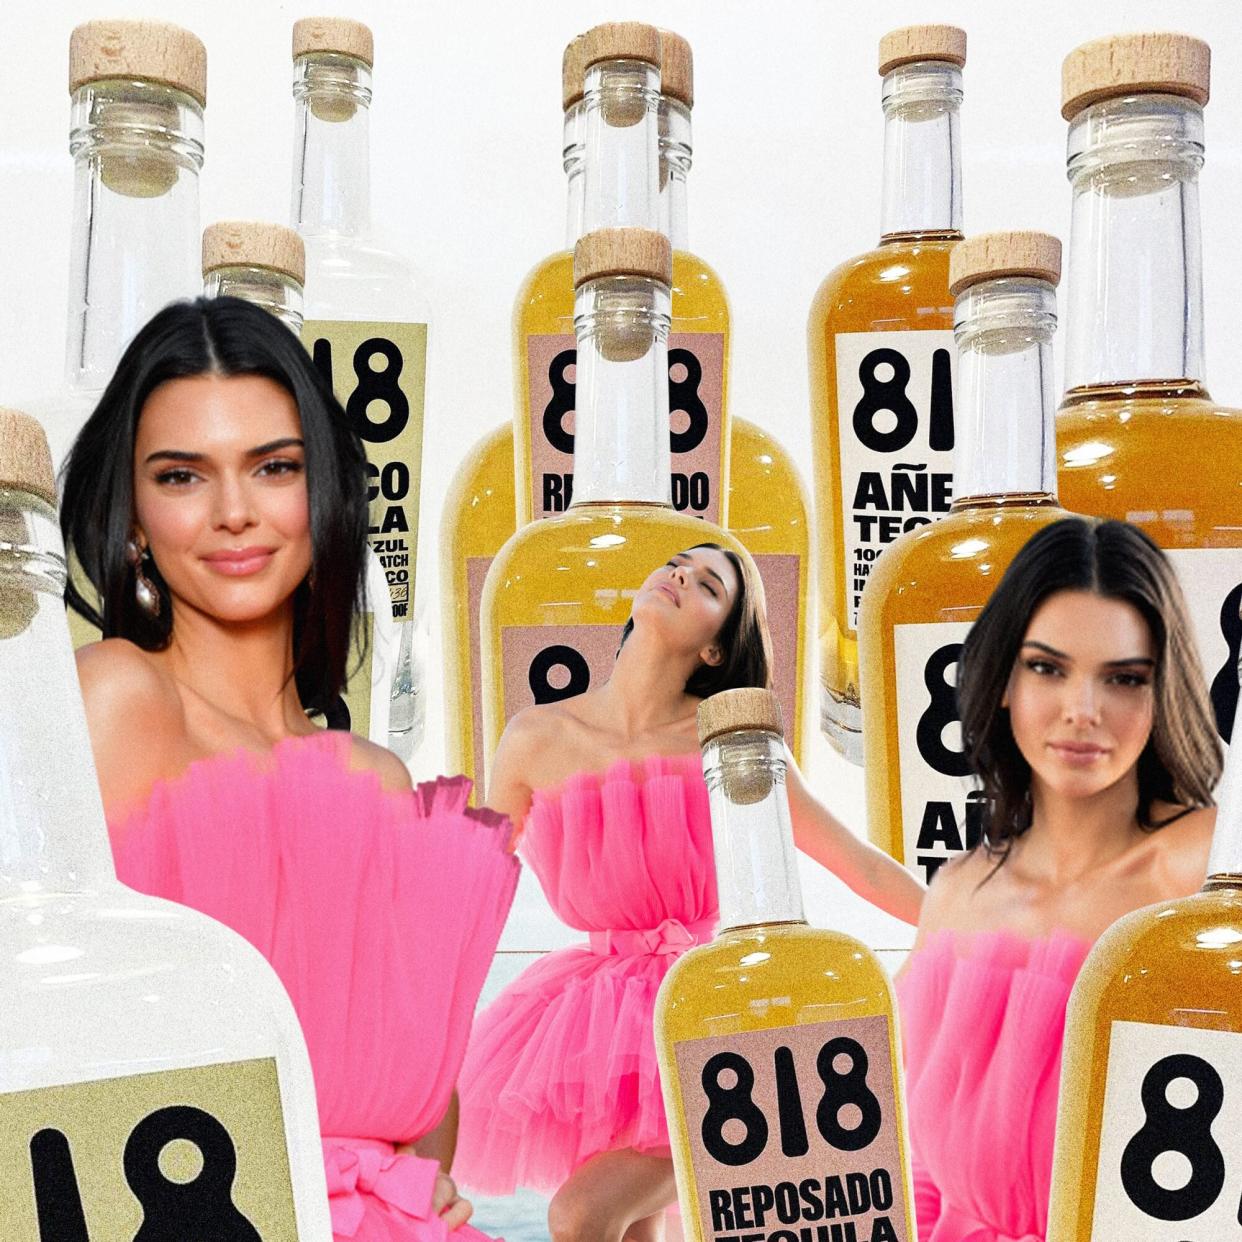 Why Is Everyone Mad at Kendall Jenner This Time?